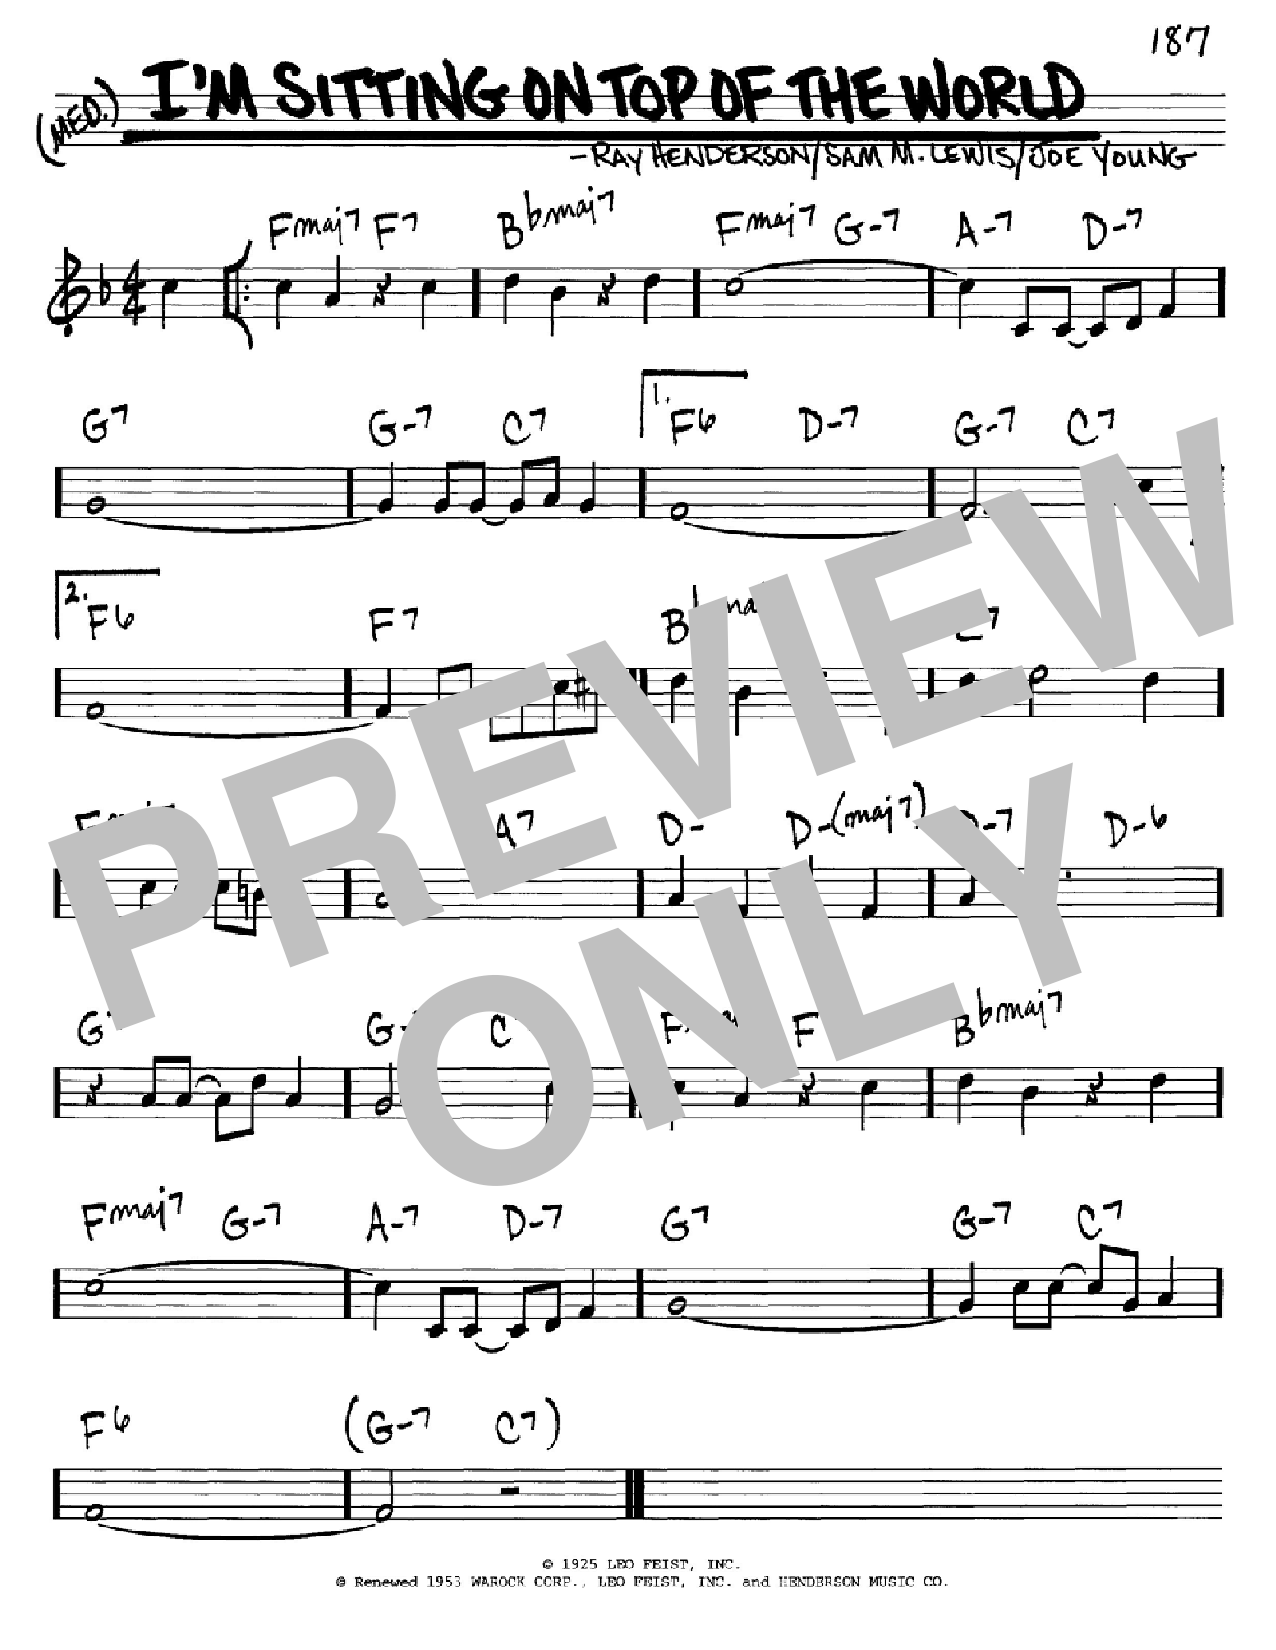 Sam M. Lewis "I'm Sitting On Of The World" Sheet Music PDF Notes, Chords | Jazz Score Real Book Melody & Chords – C Download Printable. SKU: